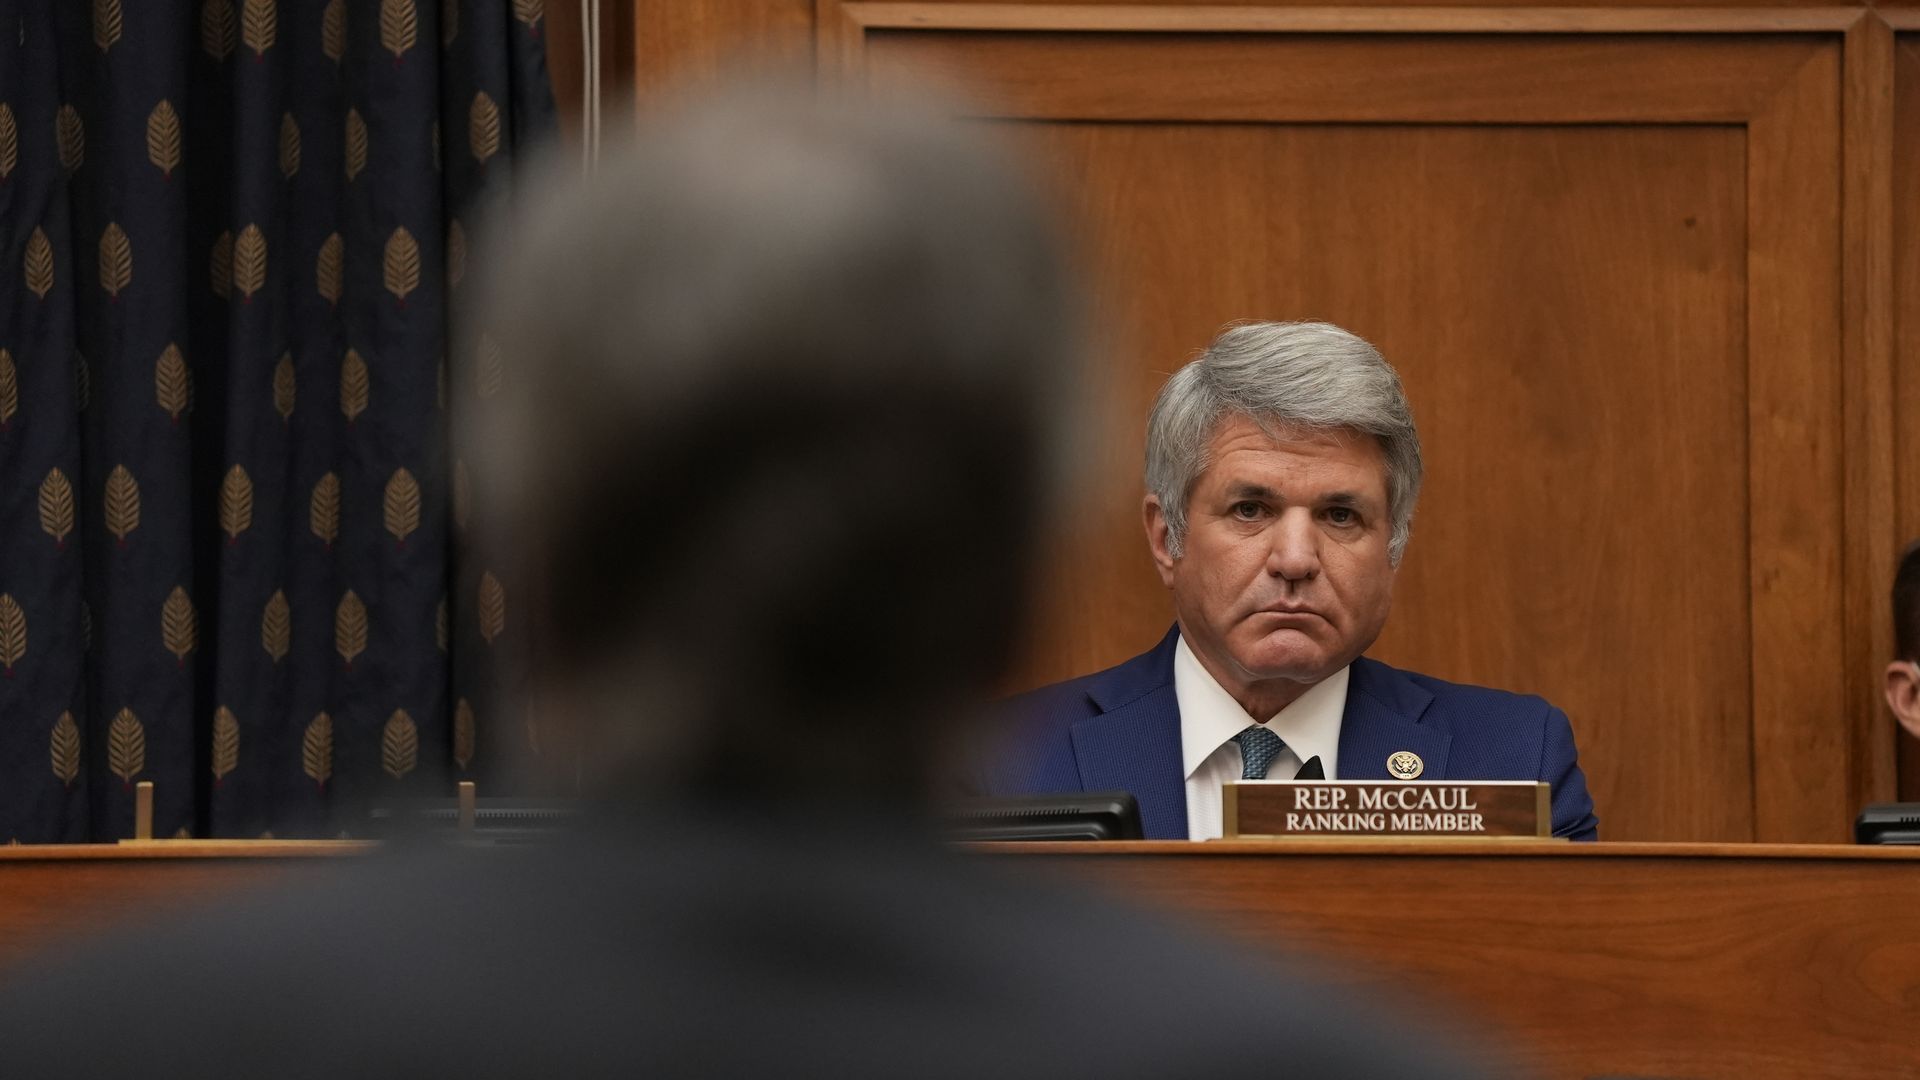 Michael McCaul, a Republican from Texas and ranking member of the House Foreign Affairs Committee, listens during a hearing in Washington, D.C.